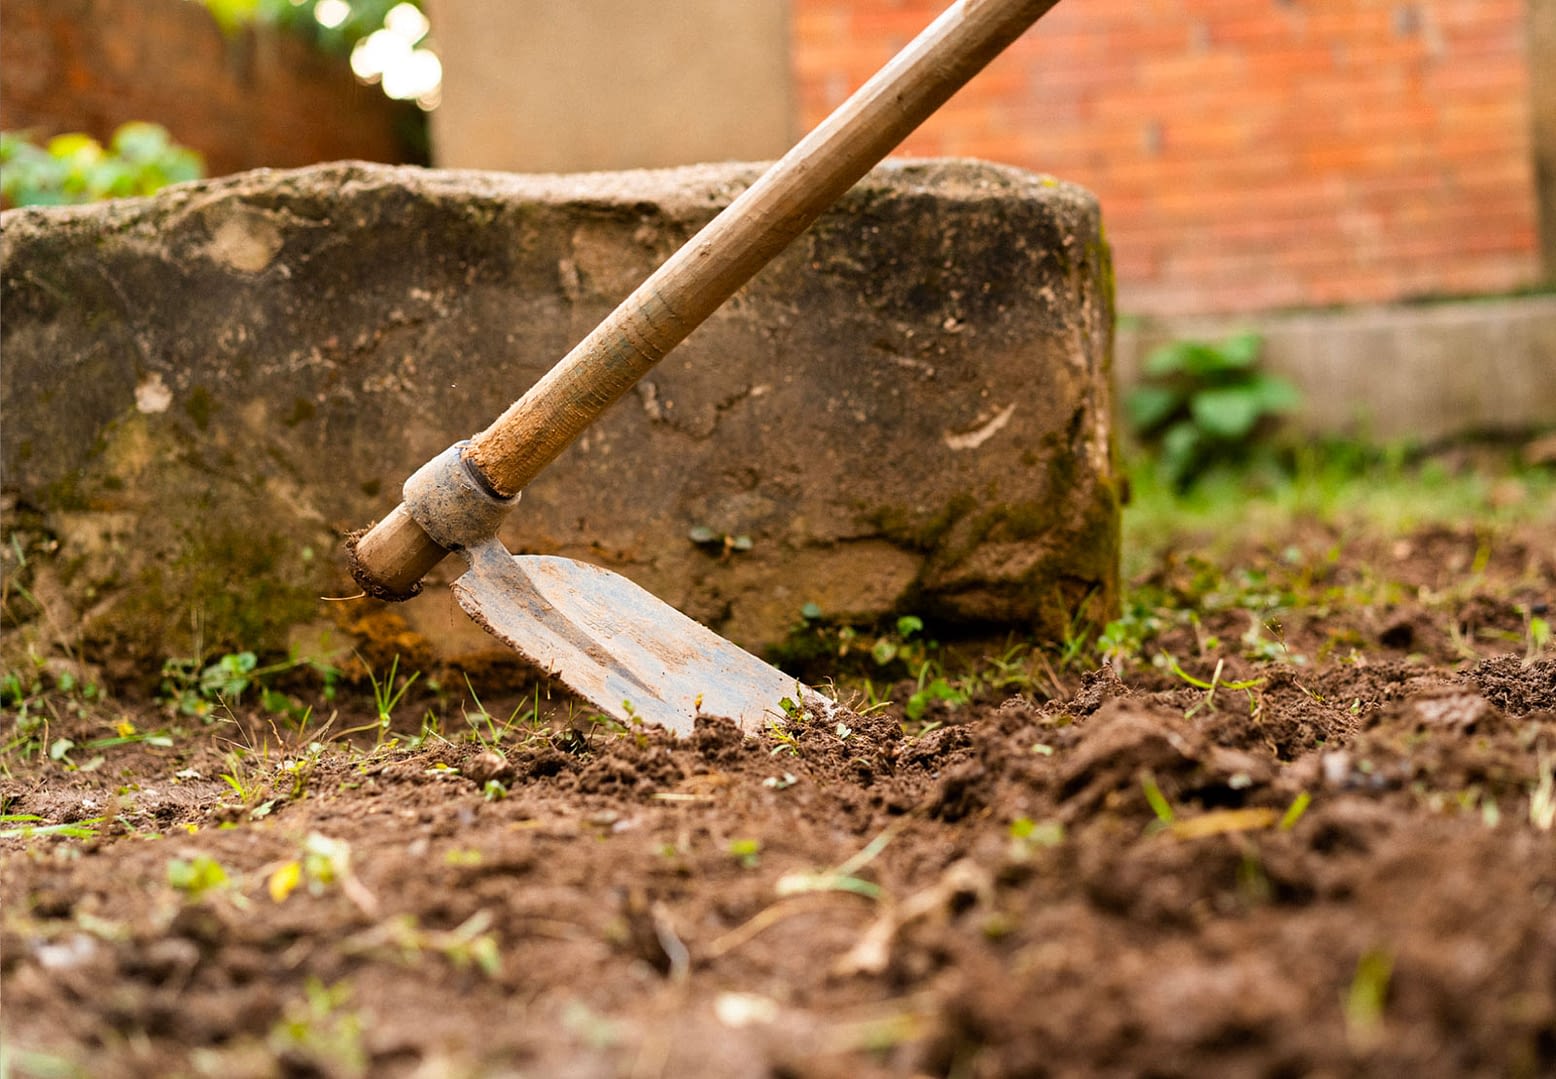 A garden hoe being used on the soil